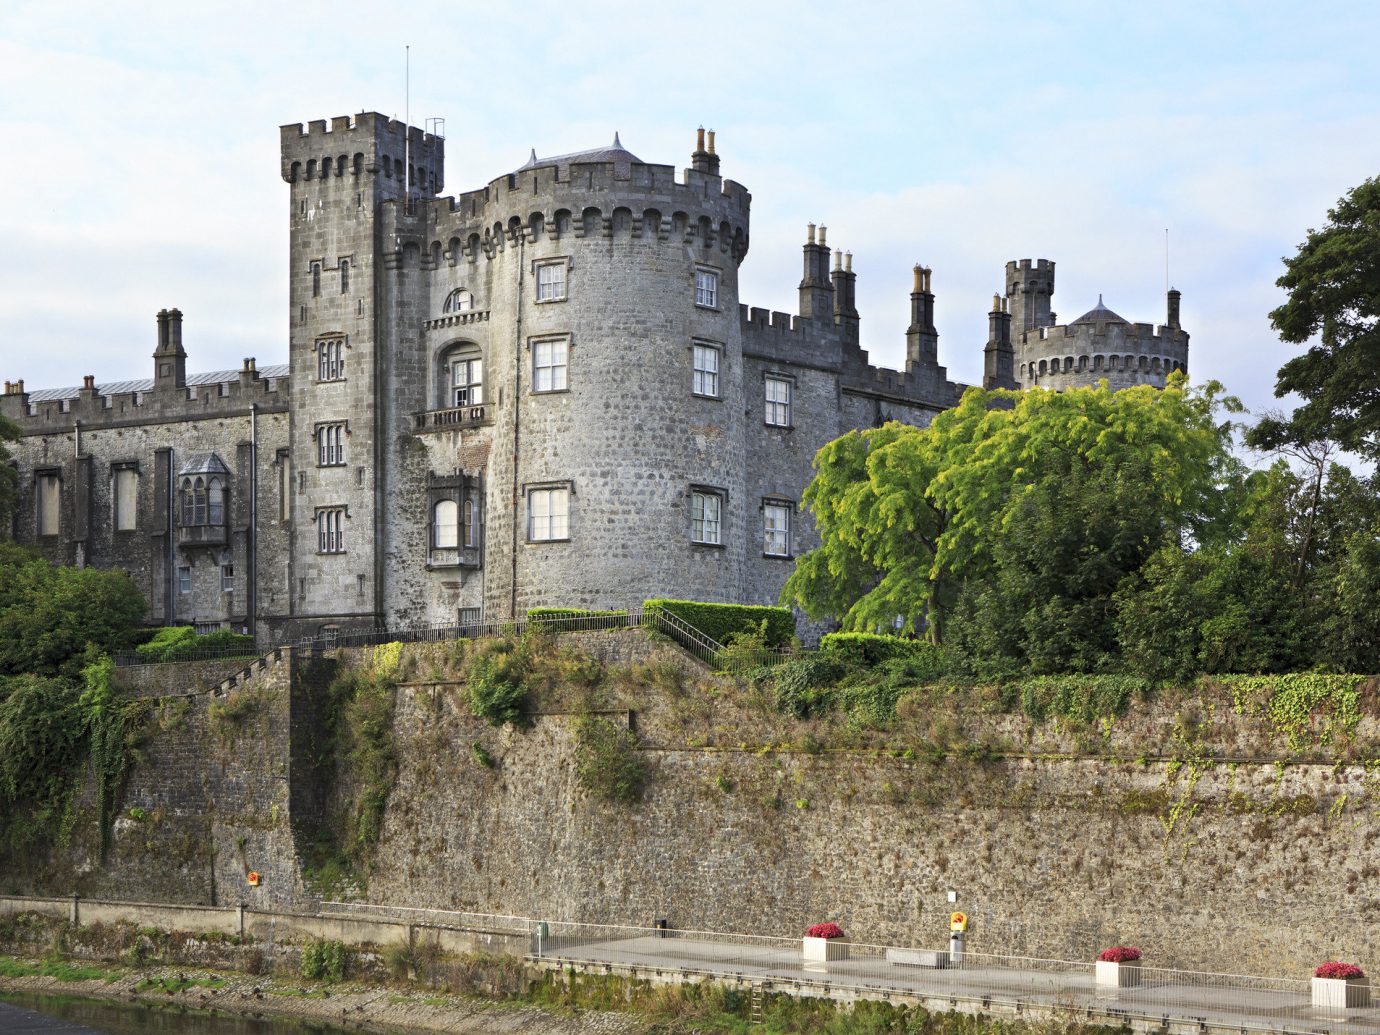 Dublin Ireland Trip Ideas building tree outdoor sky castle medieval architecture château stately home tours fortification estate national trust for places of historic interest or natural beauty moat old